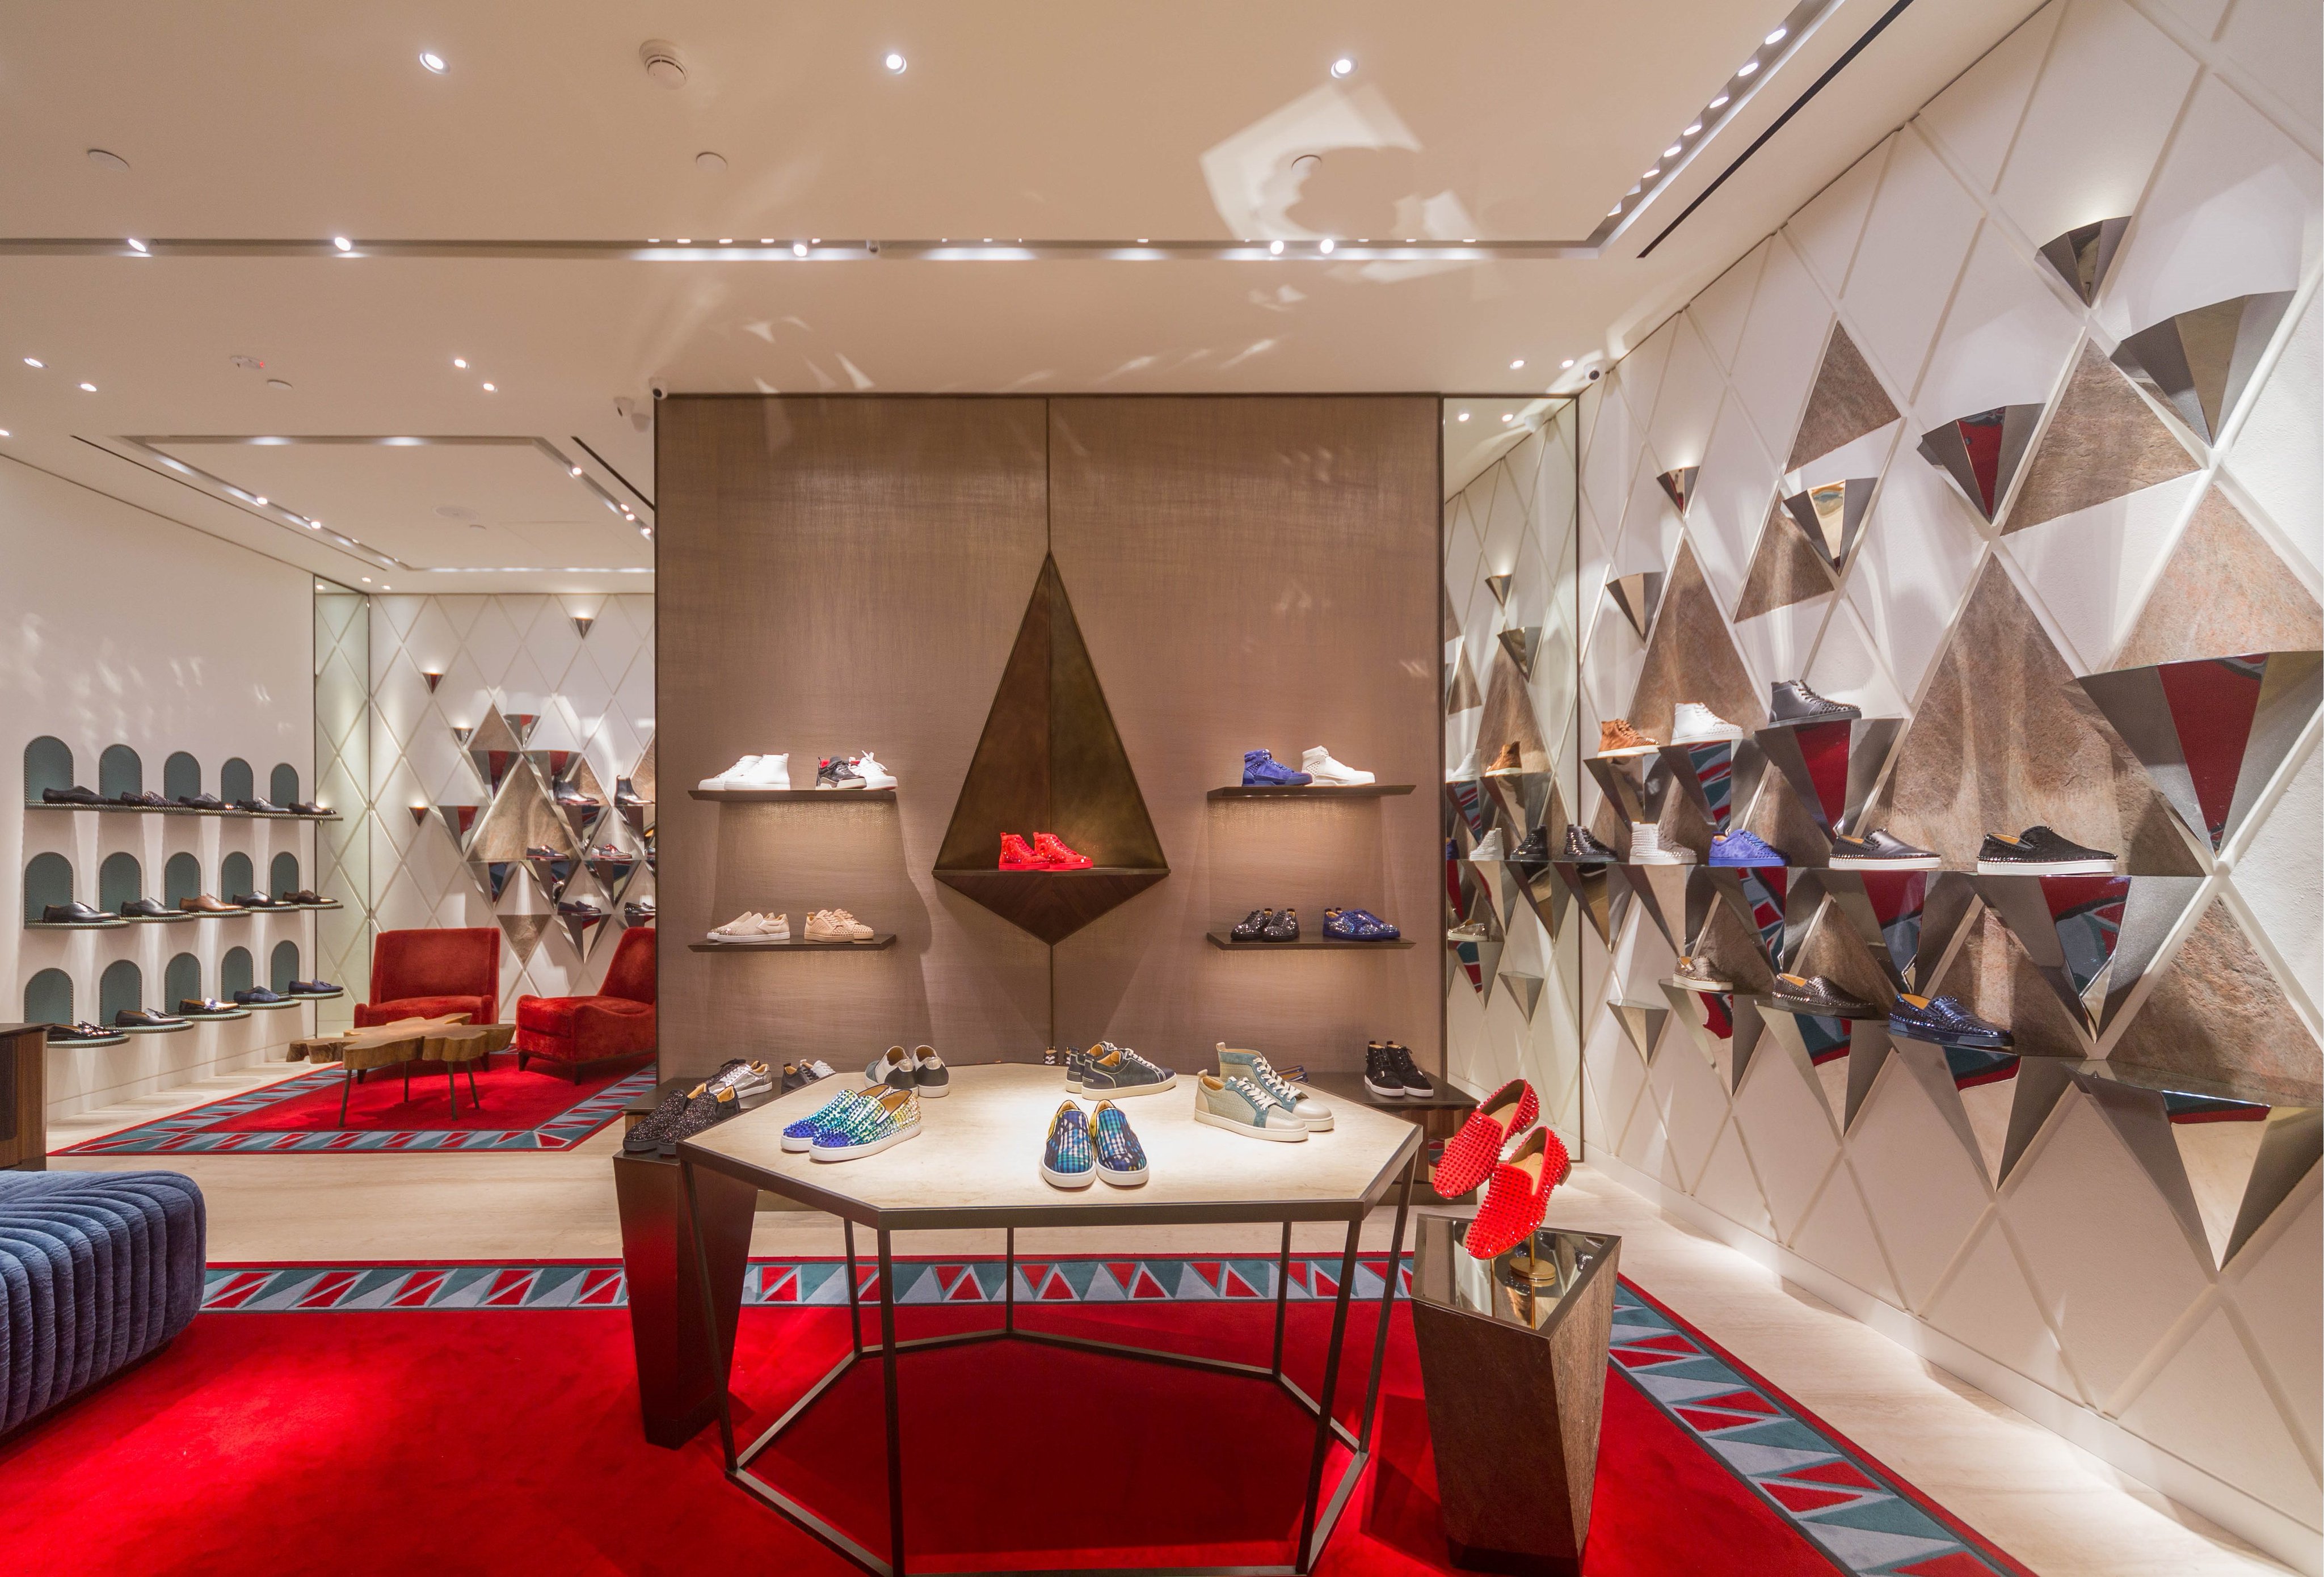 Christian Louboutin on X: Thanks for the warm welcome, Jakarta